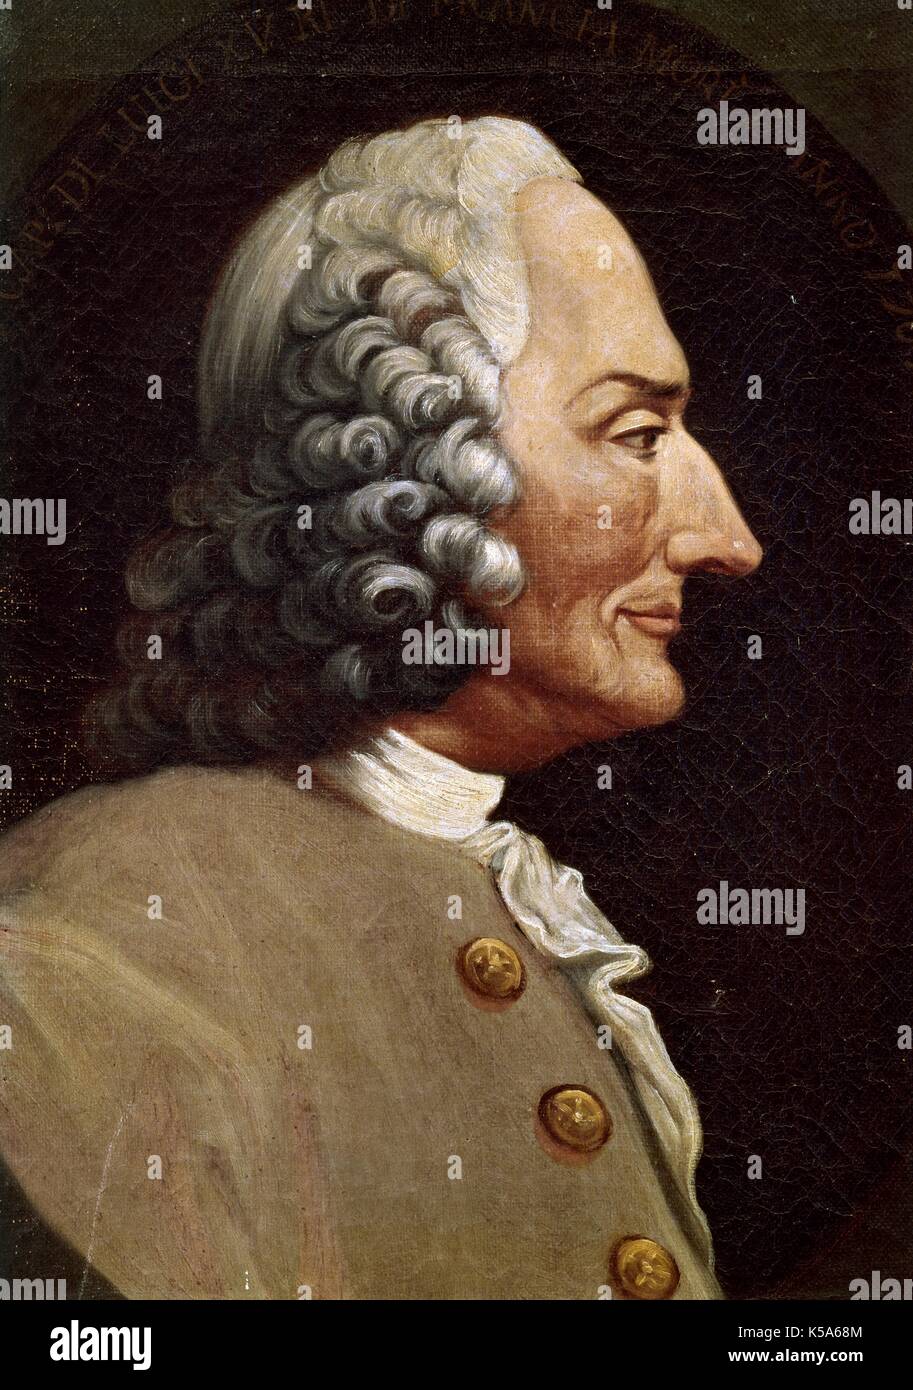 Jean Philippe Rameau (Dijon,1683-París, 1764). French composer. Anonymous painting. Civico Museo Bibliografico Musicale of Bologne (Italy). Stock Photo